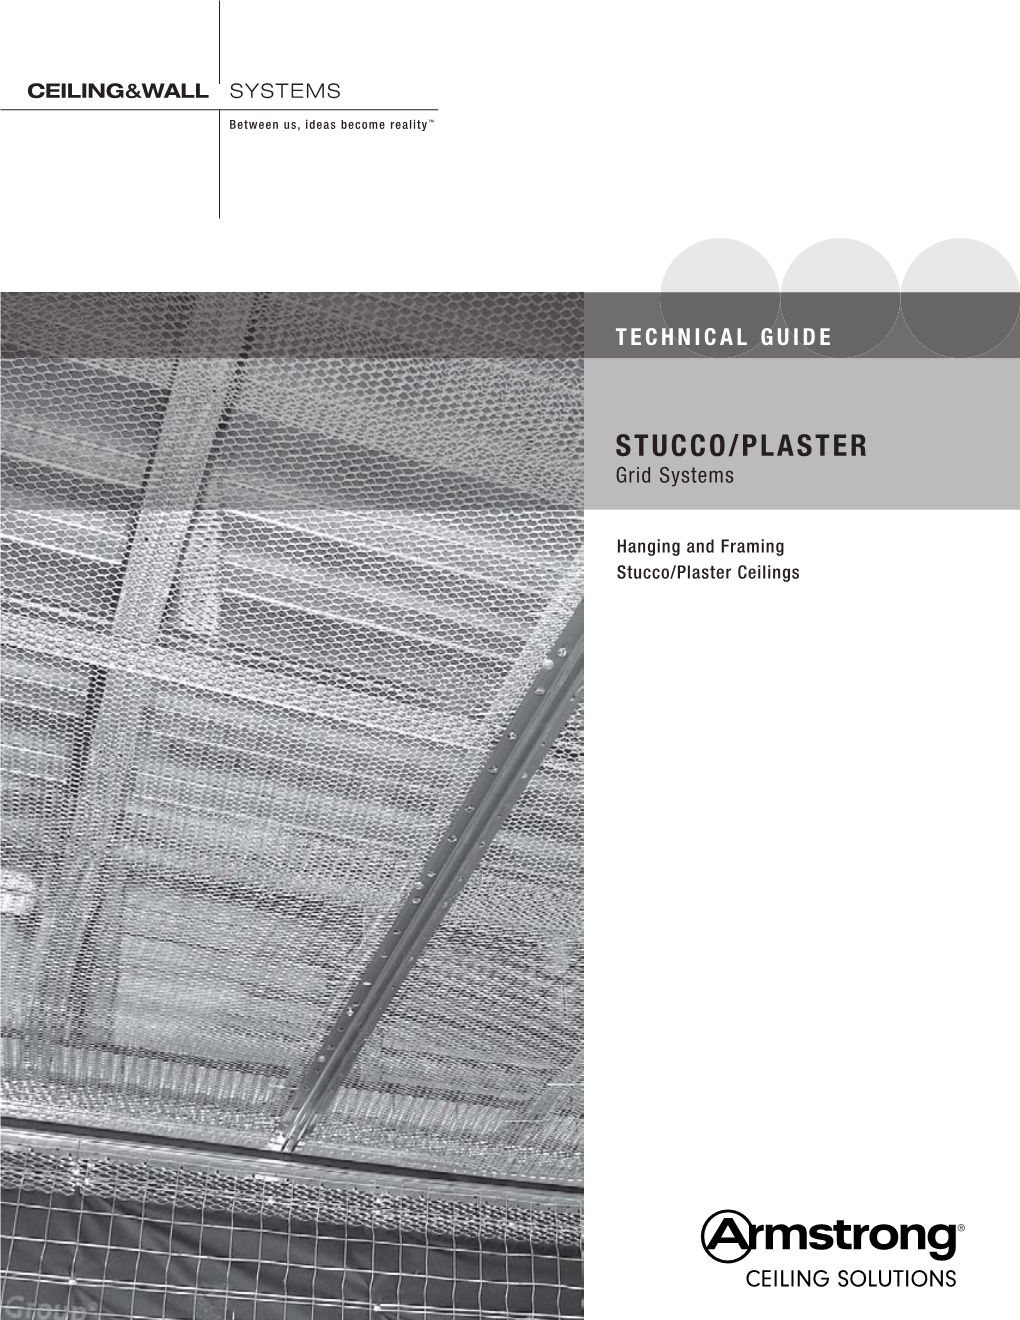 STUCCO/Plaster Grid Systems